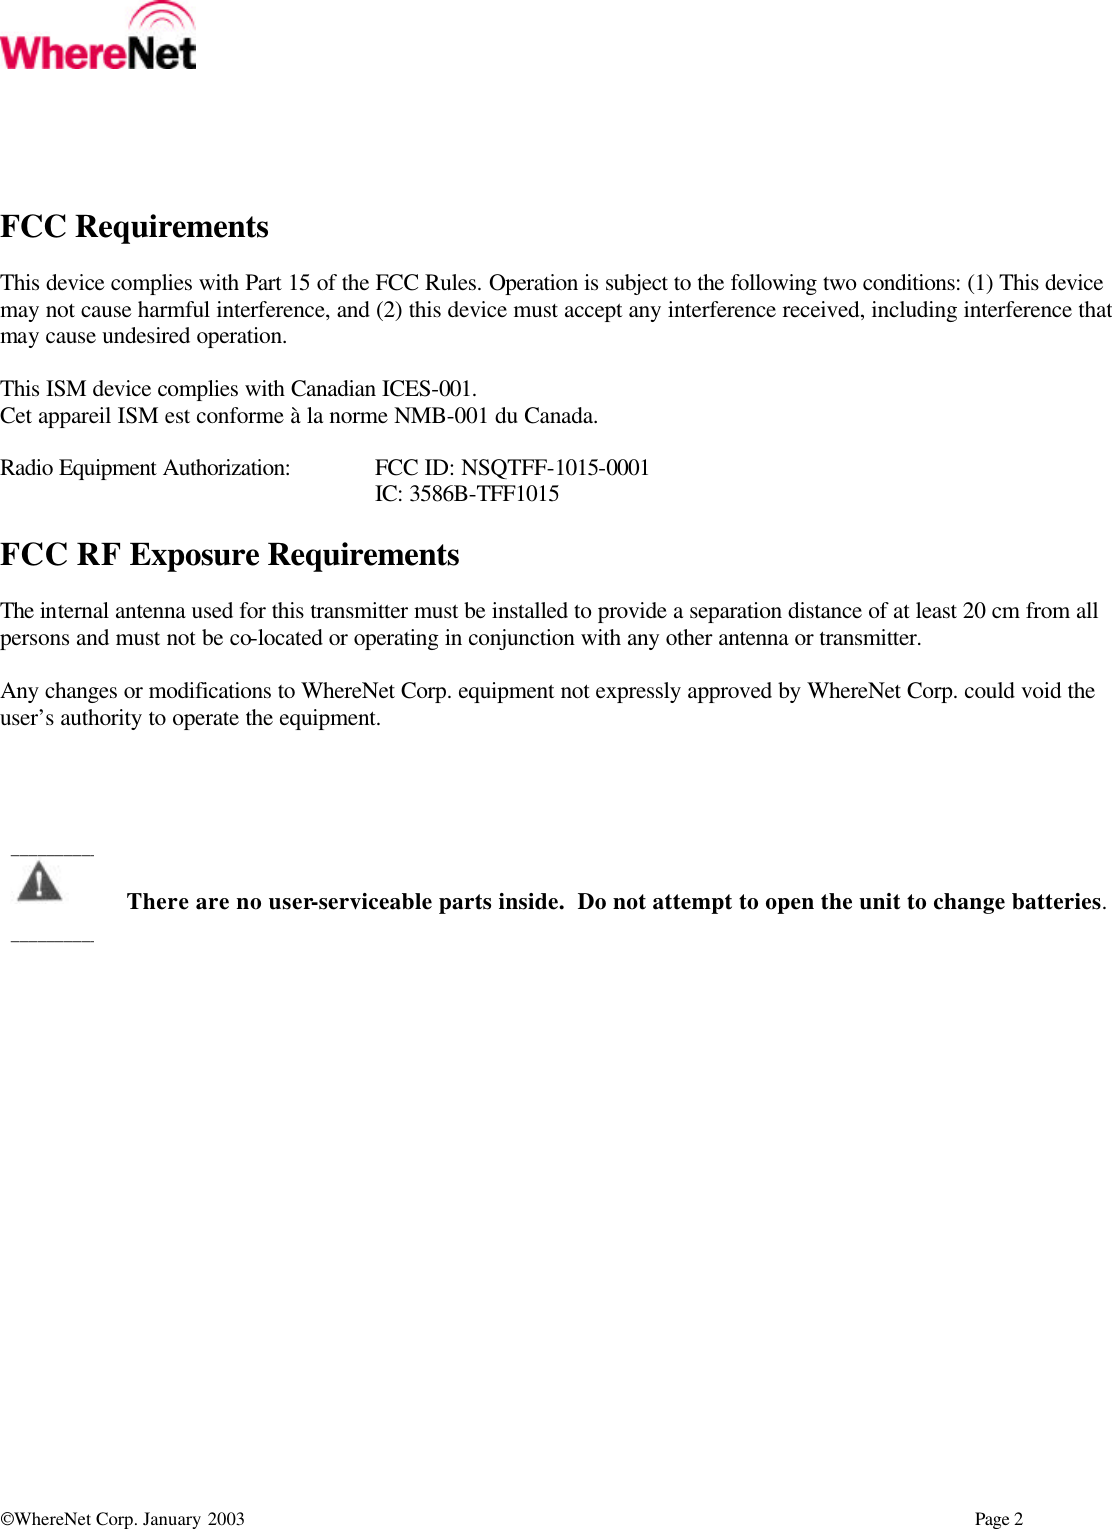  WhereNet Corp. January 2003      Page 2  FCC Requirements  This device complies with Part 15 of the FCC Rules. Operation is subject to the following two conditions: (1) This device may not cause harmful interference, and (2) this device must accept any interference received, including interference that may cause undesired operation.  This ISM device complies with Canadian ICES-001. Cet appareil ISM est conforme à la norme NMB-001 du Canada.  Radio Equipment Authorization: FCC ID: NSQTFF-1015-0001      IC: 3586B-TFF1015  FCC RF Exposure Requirements  The internal antenna used for this transmitter must be installed to provide a separation distance of at least 20 cm from all persons and must not be co-located or operating in conjunction with any other antenna or transmitter.  Any changes or modifications to WhereNet Corp. equipment not expressly approved by WhereNet Corp. could void the user’s authority to operate the equipment.       There are no user-serviceable parts inside.  Do not attempt to open the unit to change batteries. ___________________________